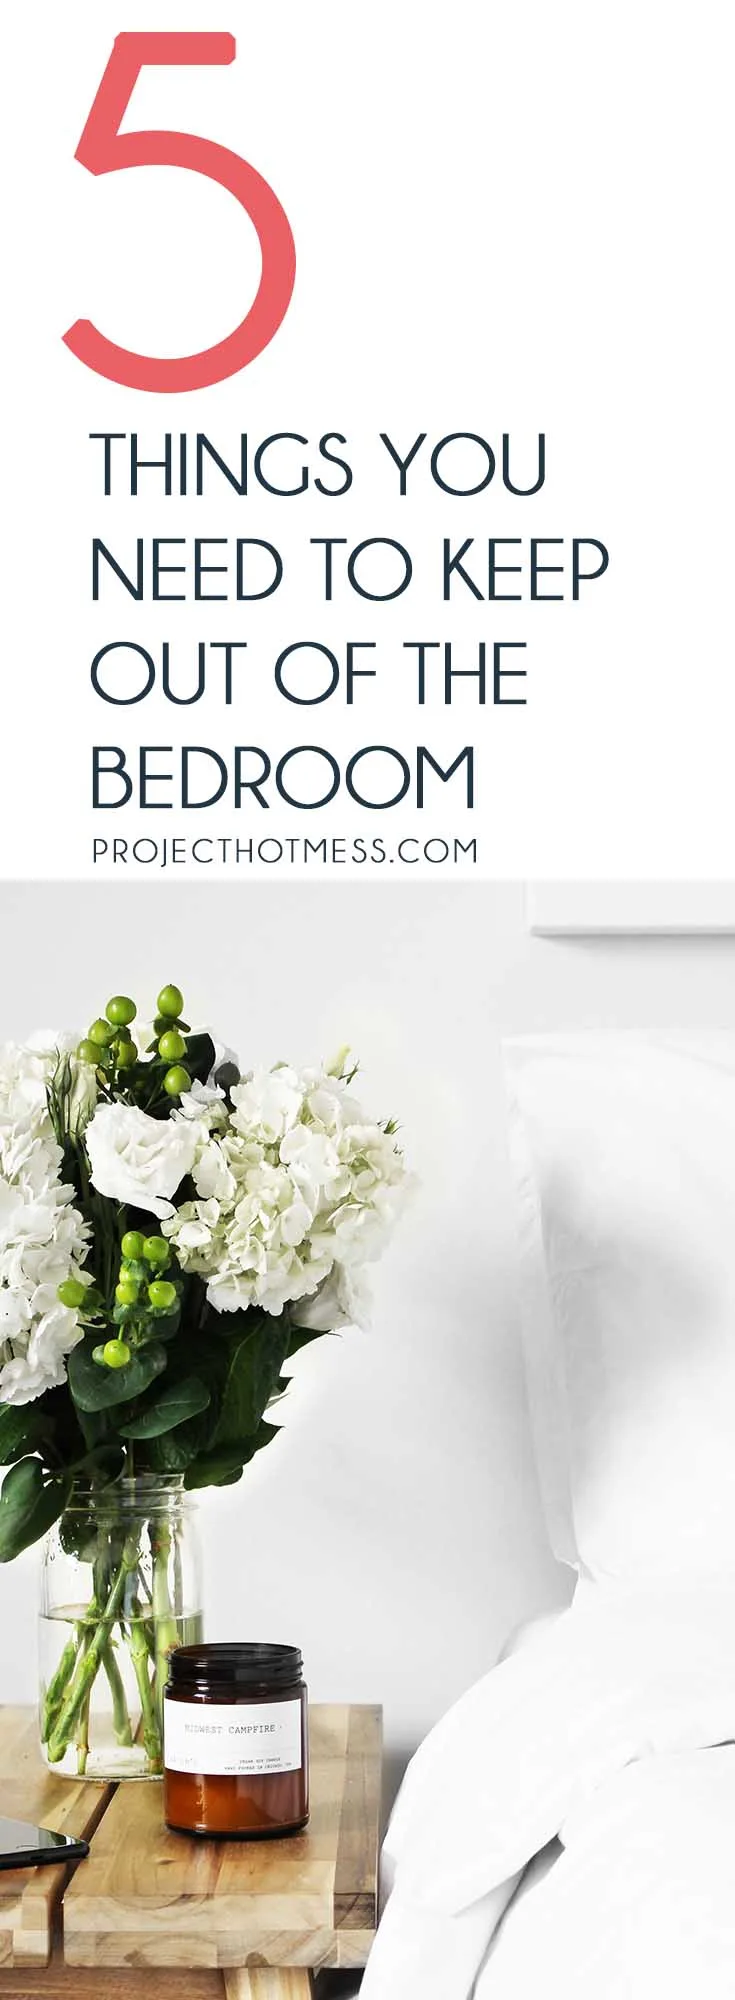 Your bedroom is supposed to be your sanctuary, but can quickly become a room of chaos. Here are 5 things to keep out of the bedroom to keep it calm and cozy.  Keeping House | Bedroom Styling | Bedroom Organisation | Hygge Bedroom | Calm Bedroom |